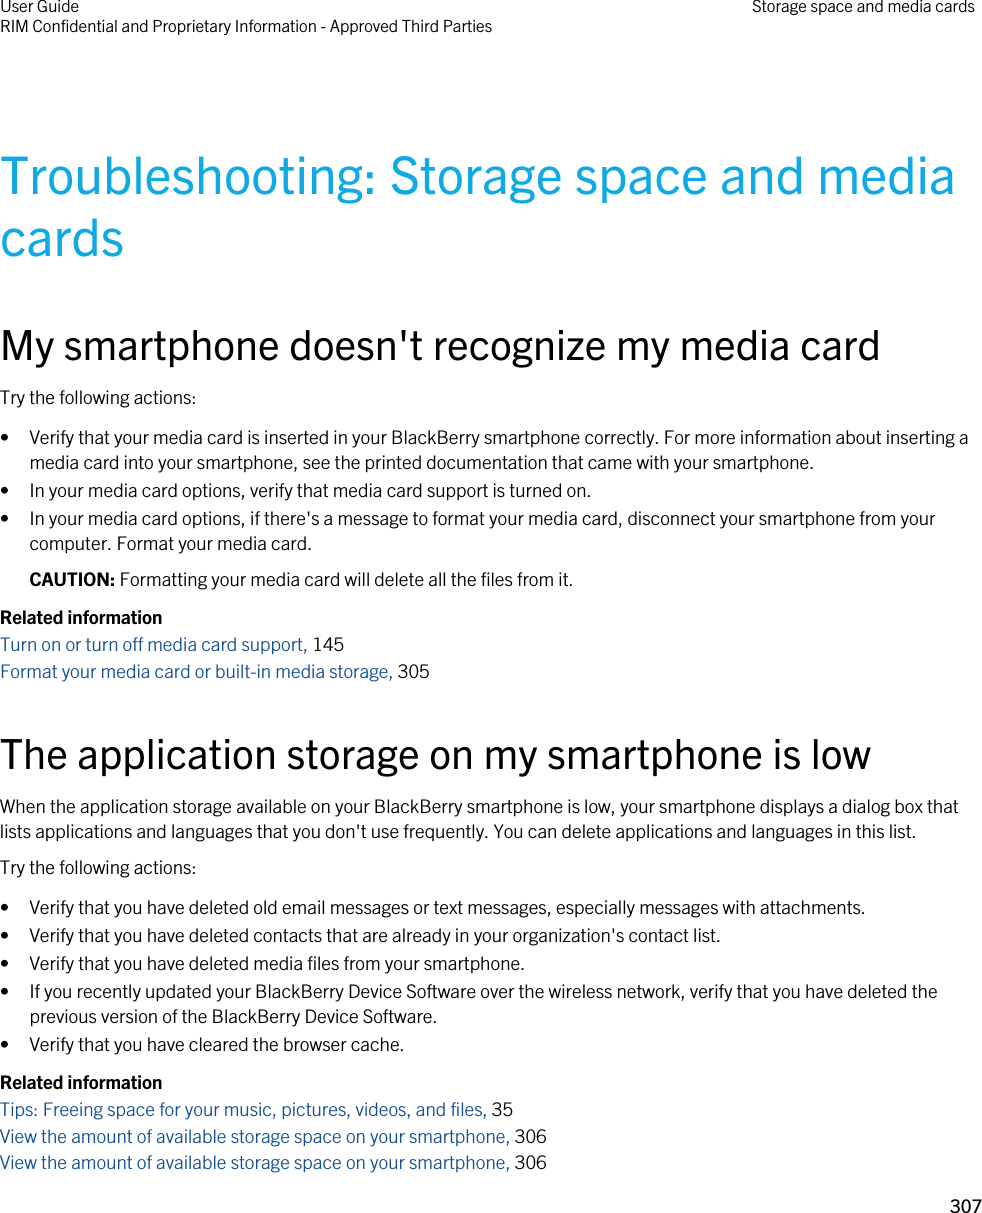 Troubleshooting: Storage space and media cardsMy smartphone doesn&apos;t recognize my media cardTry the following actions:• Verify that your media card is inserted in your BlackBerry smartphone correctly. For more information about inserting a media card into your smartphone, see the printed documentation that came with your smartphone.• In your media card options, verify that media card support is turned on.• In your media card options, if there&apos;s a message to format your media card, disconnect your smartphone from your computer. Format your media card.CAUTION: Formatting your media card will delete all the files from it.Related informationTurn on or turn off media card support, 145 Format your media card or built-in media storage, 305 The application storage on my smartphone is lowWhen the application storage available on your BlackBerry smartphone is low, your smartphone displays a dialog box that lists applications and languages that you don&apos;t use frequently. You can delete applications and languages in this list.Try the following actions:• Verify that you have deleted old email messages or text messages, especially messages with attachments.• Verify that you have deleted contacts that are already in your organization&apos;s contact list.• Verify that you have deleted media files from your smartphone.• If you recently updated your BlackBerry Device Software over the wireless network, verify that you have deleted the previous version of the BlackBerry Device Software.• Verify that you have cleared the browser cache.Related informationTips: Freeing space for your music, pictures, videos, and files, 35 View the amount of available storage space on your smartphone, 306 View the amount of available storage space on your smartphone, 306 User GuideRIM Confidential and Proprietary Information - Approved Third Parties Storage space and media cards307 